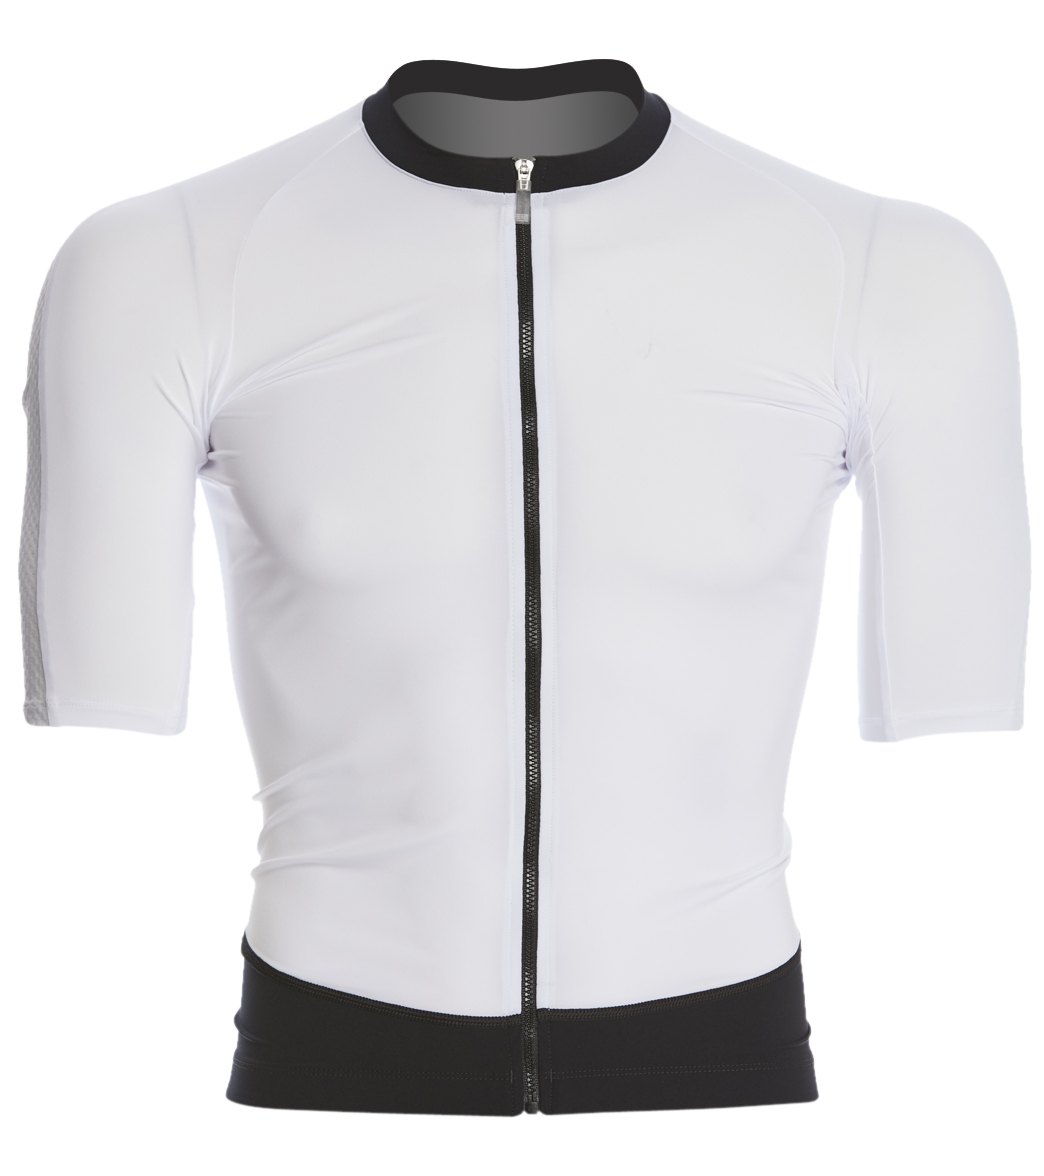 Castelli Men's Stealth T1 Long Sleeve Tri Top at SwimOutlet.com - Free ...